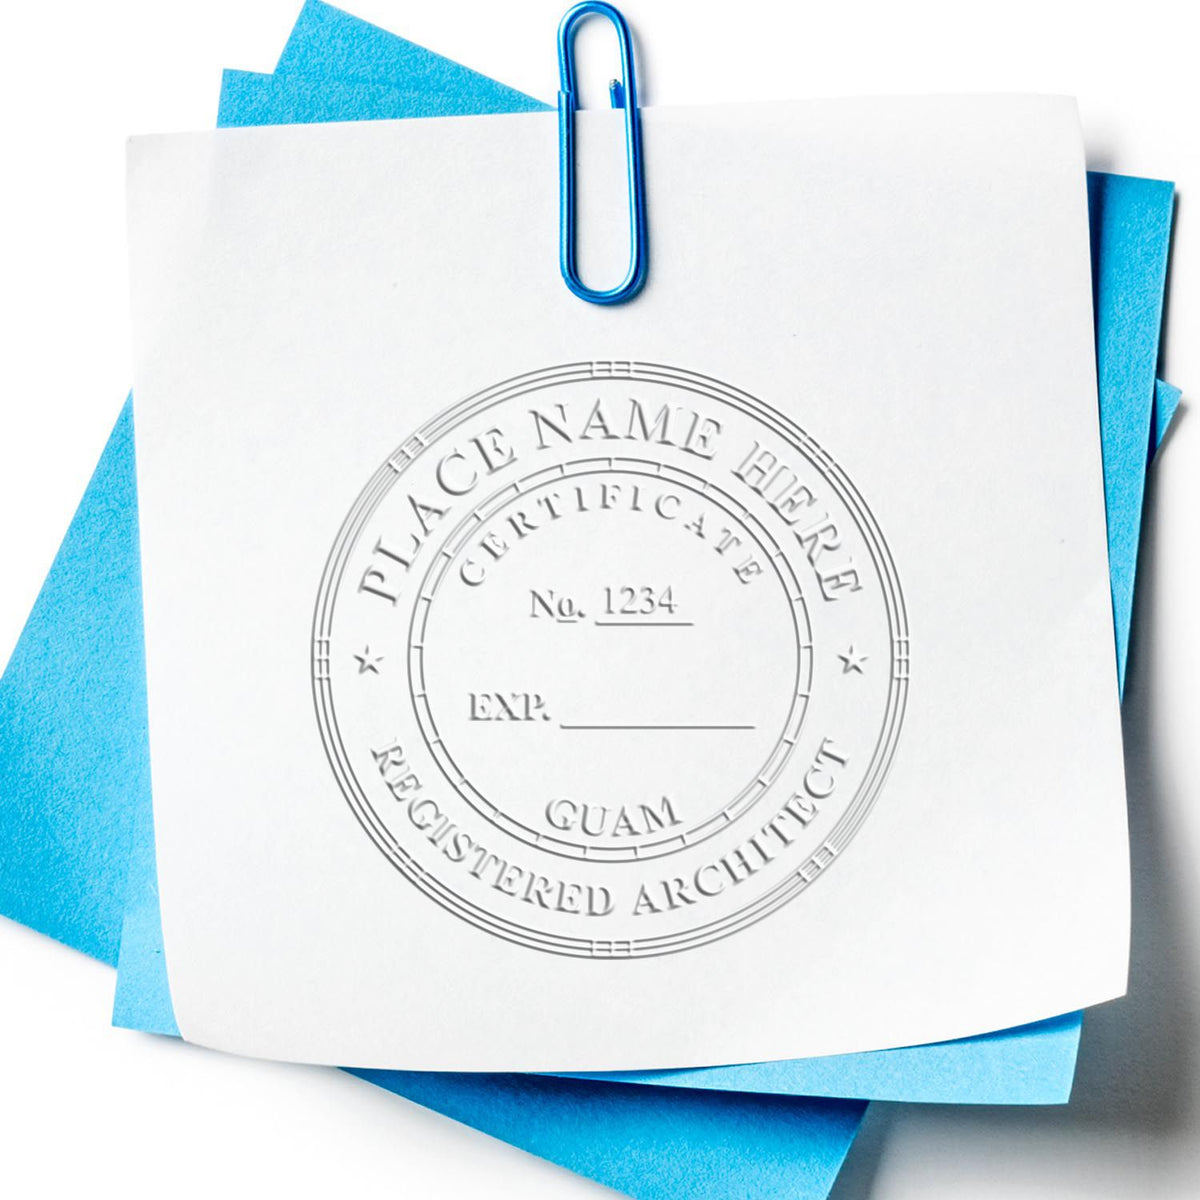 An alternative view of the State of Guam Long Reach Architectural Embossing Seal stamped on a sheet of paper showing the image in use